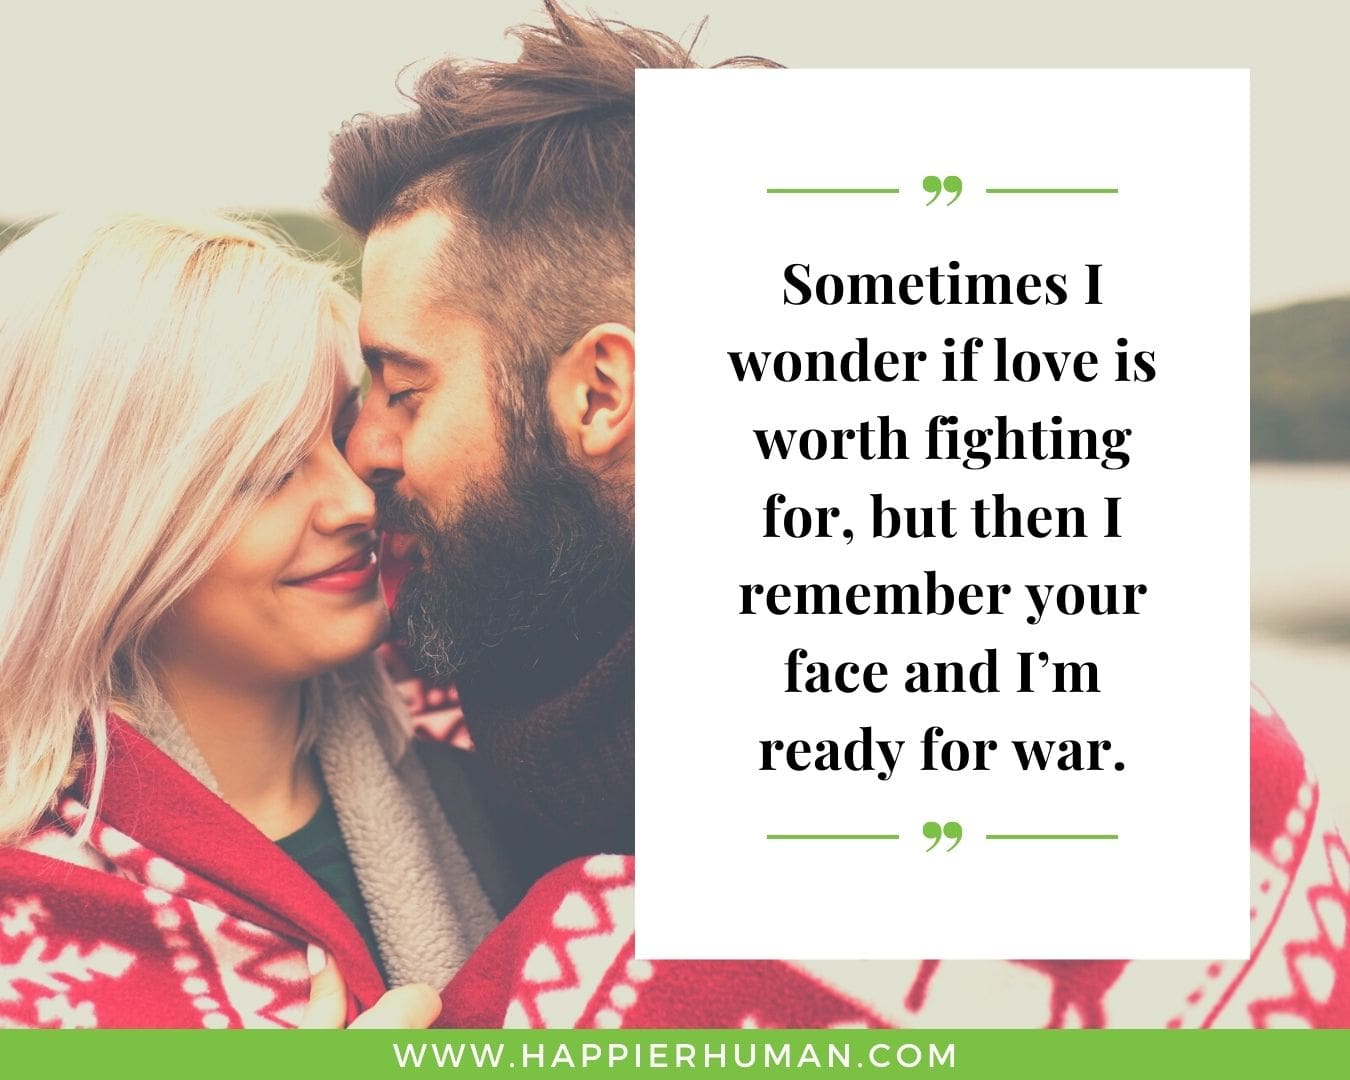 Sweet and Romantic Love Quotes for Her - “Sometimes I wonder if love is worth fighting for, but then I remember your face and I’m ready for war.”